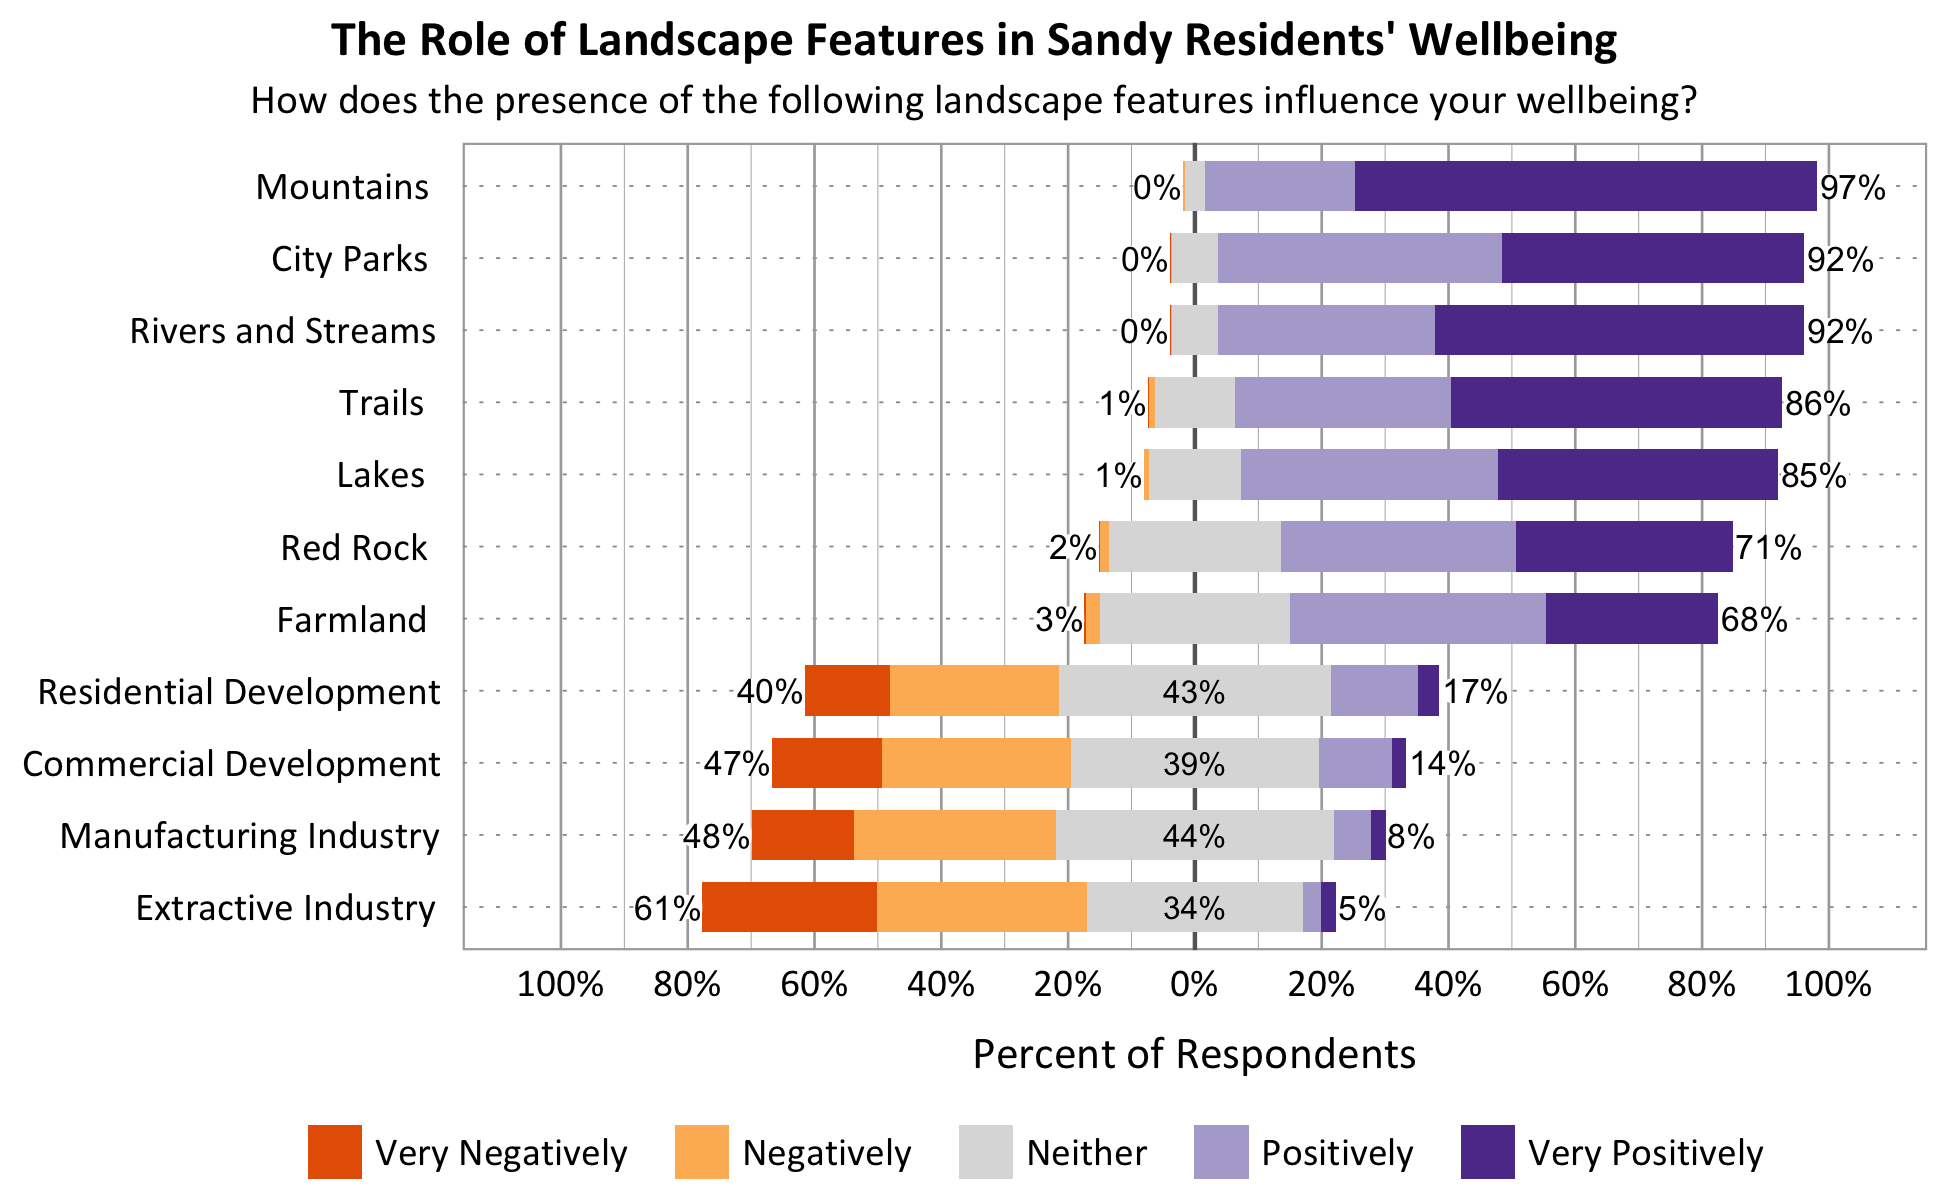 Likert Graph. Title: The Role of Landscape Features in Sandy Residents' Wellbeing. Subtitle: How does the presence of the following landscape features influence your wellbeing? Feature: Mountains - 0% of respondents indicated very negatively or negatively, 3% indicated neither, 97% indicated positively or very positively; Feature: Rivers and Streams - 0% of respondents indicated very negatively or negatively, 8% indicated neither, 92% indicated positively or very positively; Feature: Lakes - 1% of respondents indicated very negatively or negatively, 14% indicated neither, 85% indicated positively or very positively; Feature: Trails - 1% of respondents indicated very negatively or negatively, 15% indicated neither, 86% indicated positively or very positively; Feature: Red Rock - 2% of respondents indicated very negatively or negatively, 27% indicated neither, 71% indicated positively or very positively; Feature: City Parks - 0% of respondents indicated very negatively or negatively, 8% indicated neither, 92% indicated positively or very positively; Feature: Farmland - 3% of respondents indicated very negatively or negatively, 29% indicated neither, 68% indicated positively or very positively; Feature: Residential Development - 40% of respondents indicated very negatively or negatively, 43% indicated neither, 17% indicated positively or very positively; Feature: Commercial Development - 47% of respondents indicated very negatively or negatively, 39% indicated neither, 14% indicated positively or very positively; Feature: Extractive Industry - 61% of respondents indicated very negatively or negatively, 34% indicated neither, 5% indicated positively or very positively; Feature: Manufacturing Industry - 48% of respondents indicated very negatively or negatively, 44% indicated neither, 8% indicated positively or very positively.